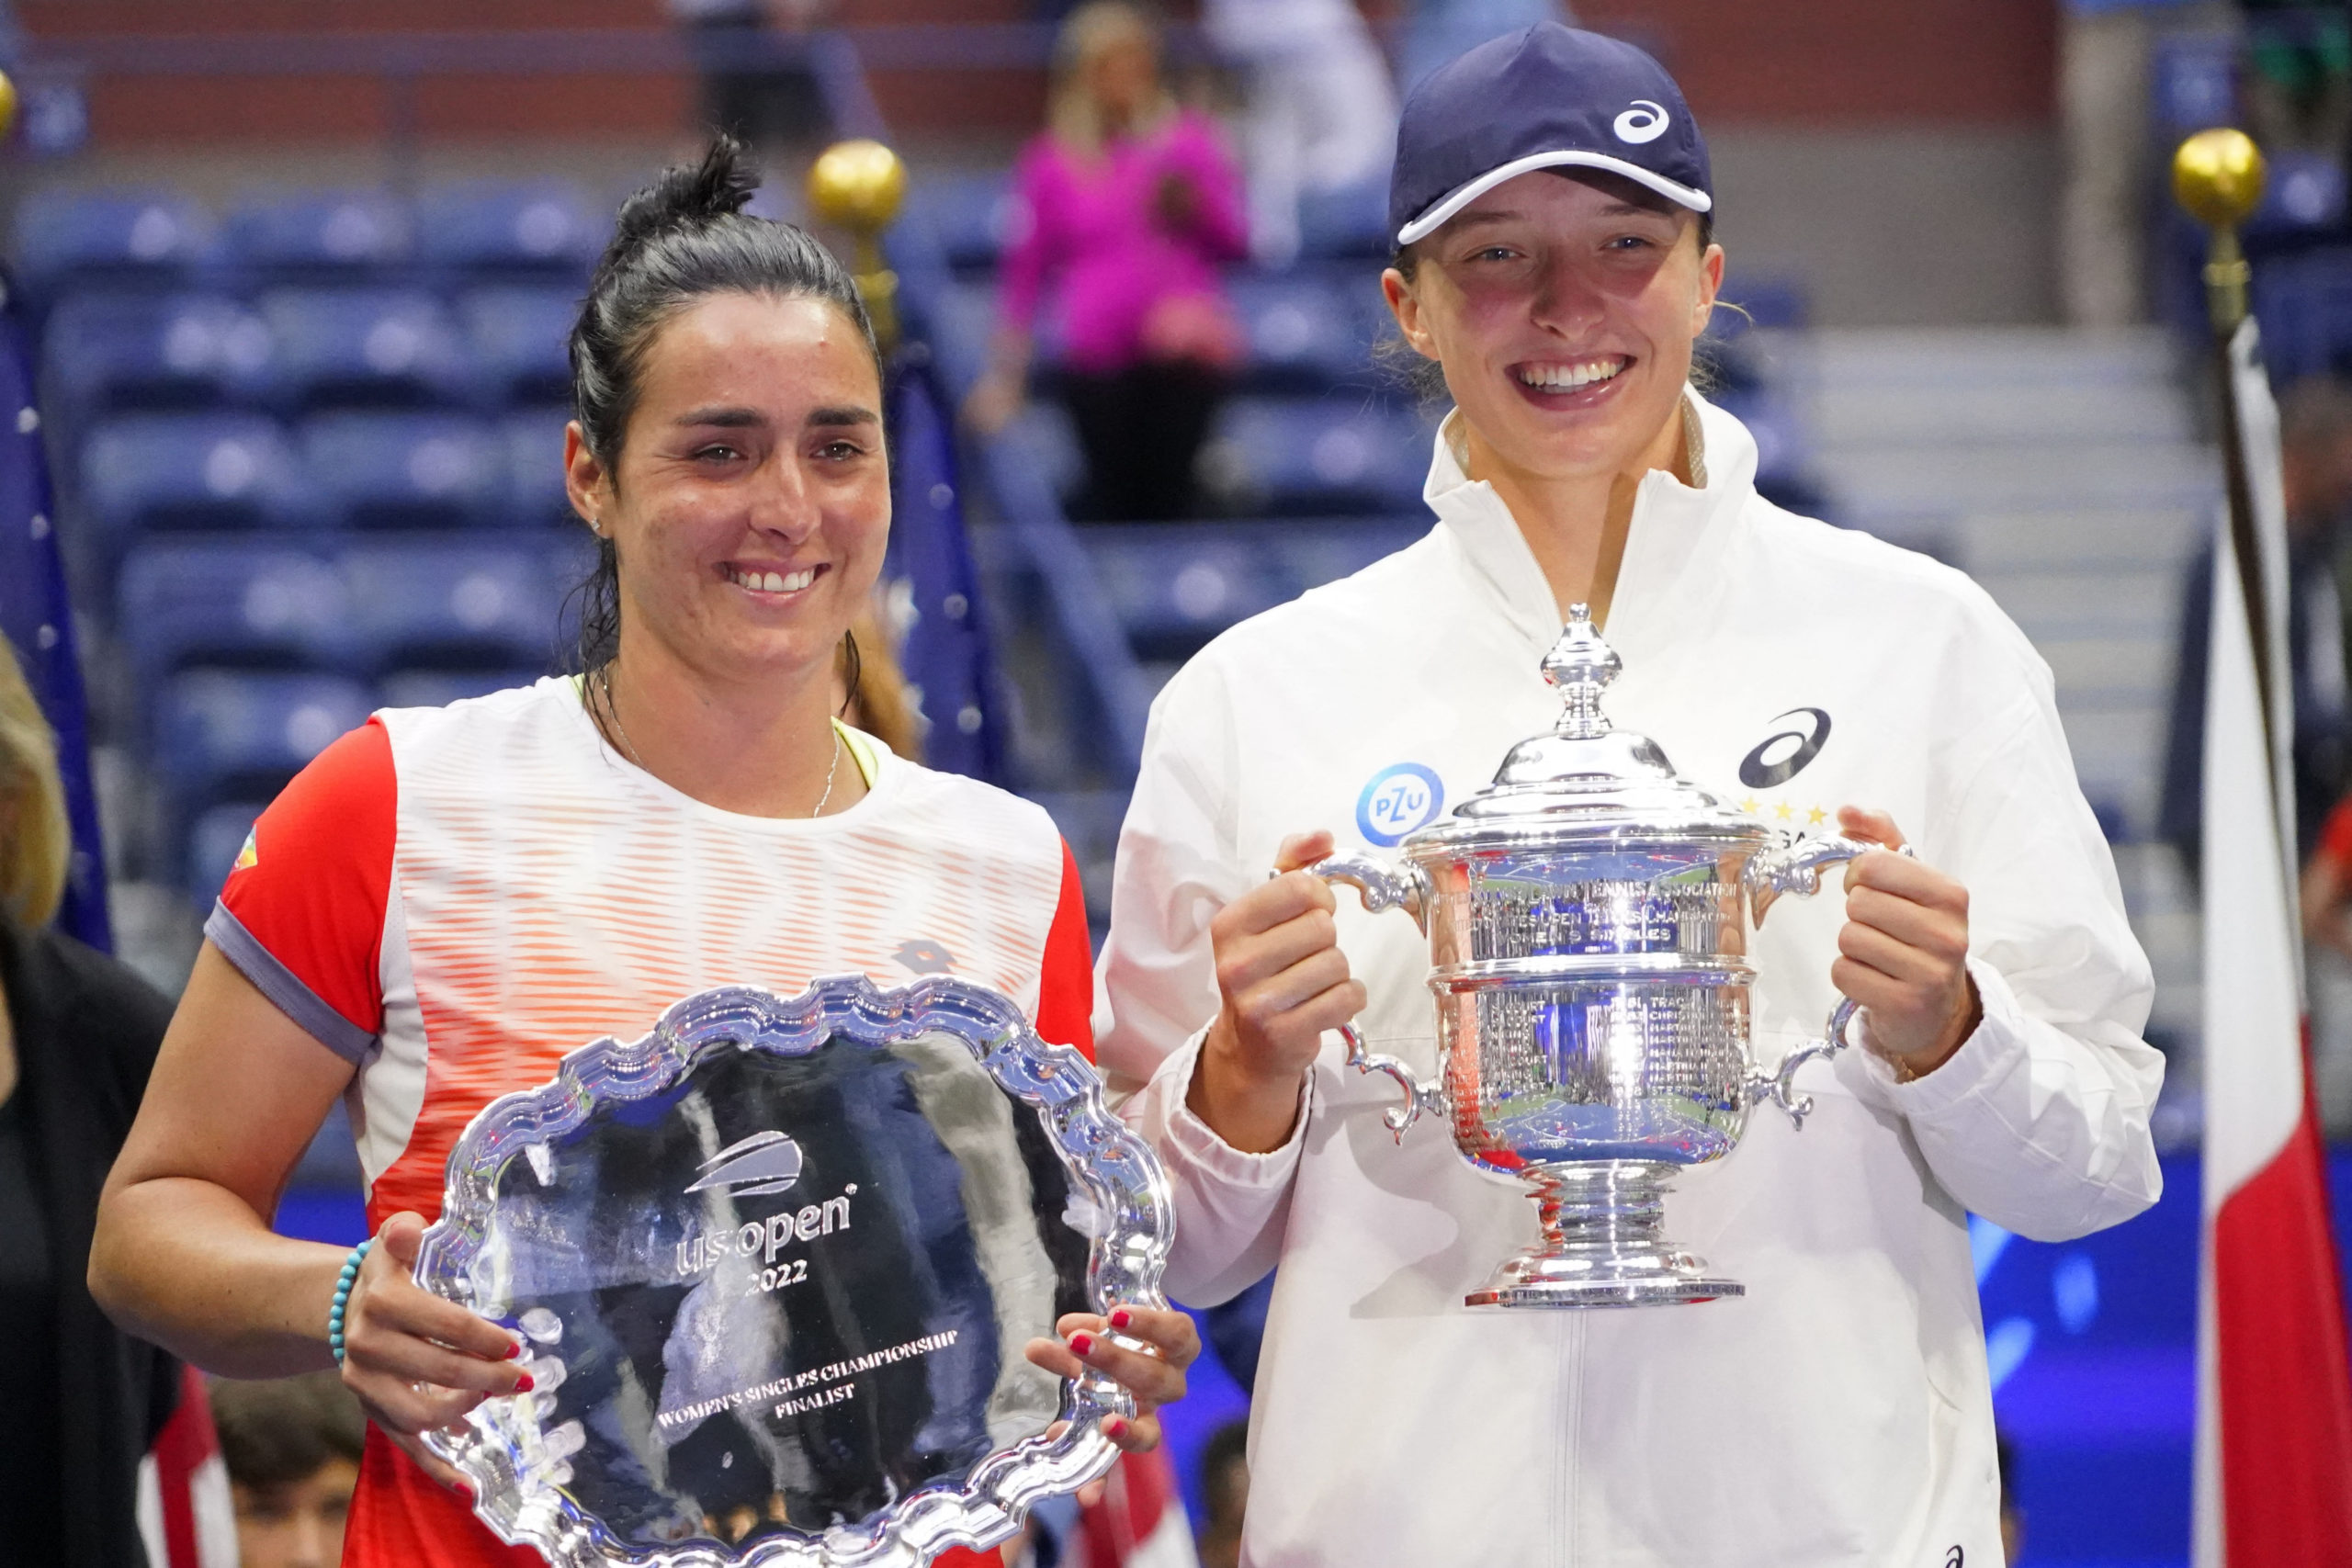 Ons Jabeur (TUN) (L) and Iga Swiatek (POL) (R) hold the finalist and championship trophies (respectively) after their match in the women's singles final on day thirteen of the 2022 U.S. Open tennis tournament at USTA Billie Jean King Tennis Center